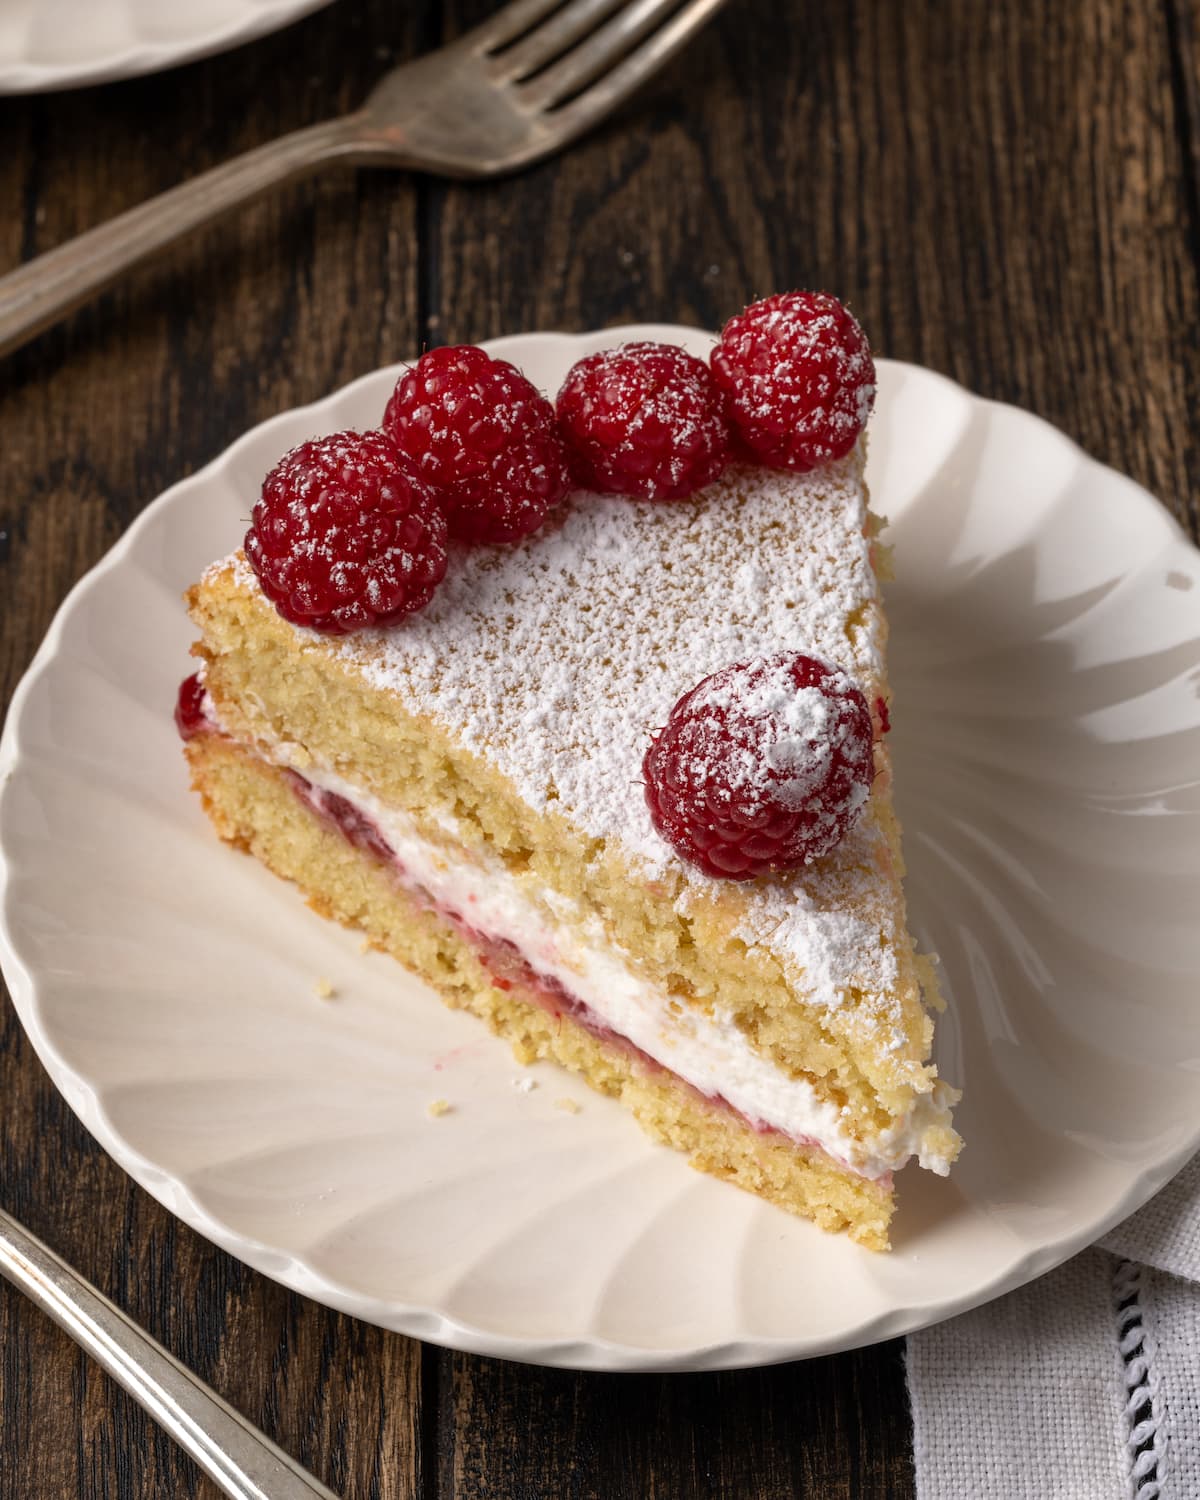 A slice of Victoria sponge cake on a white plate, topped with fresh raspberries.